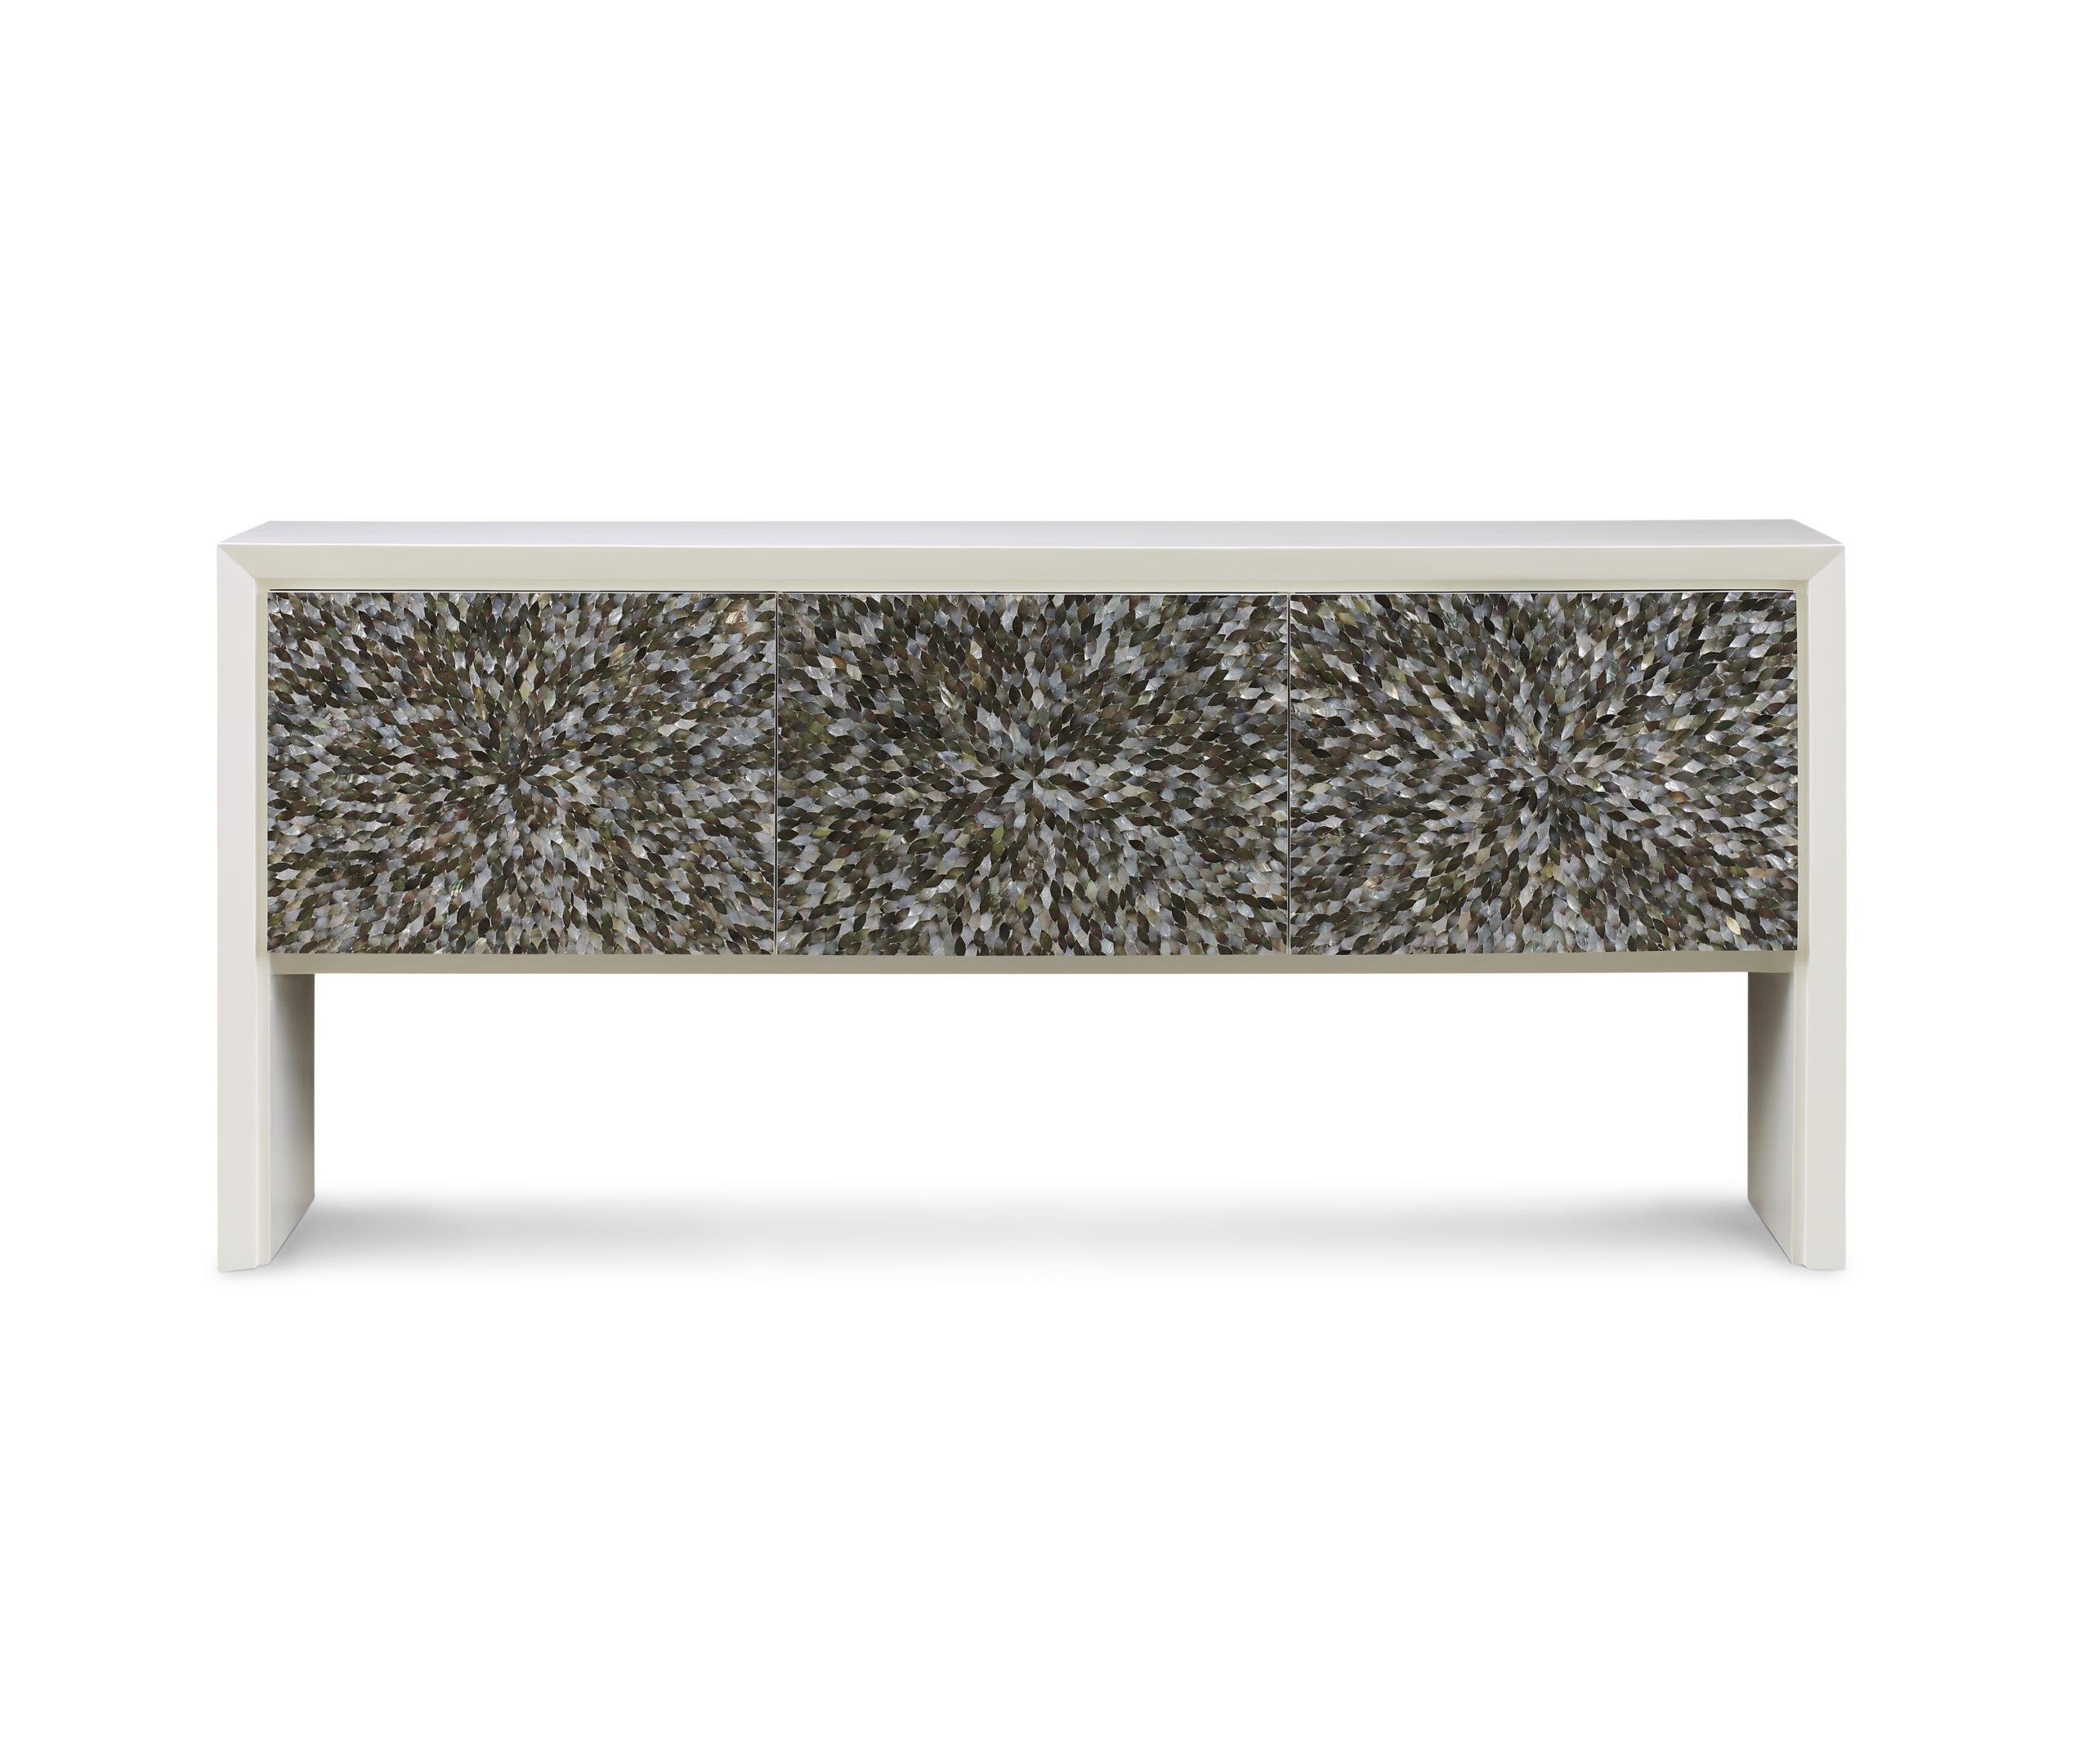 Baker_products_WNWN_nacre_sideboard_BAA3230_FRONT-scaled-1